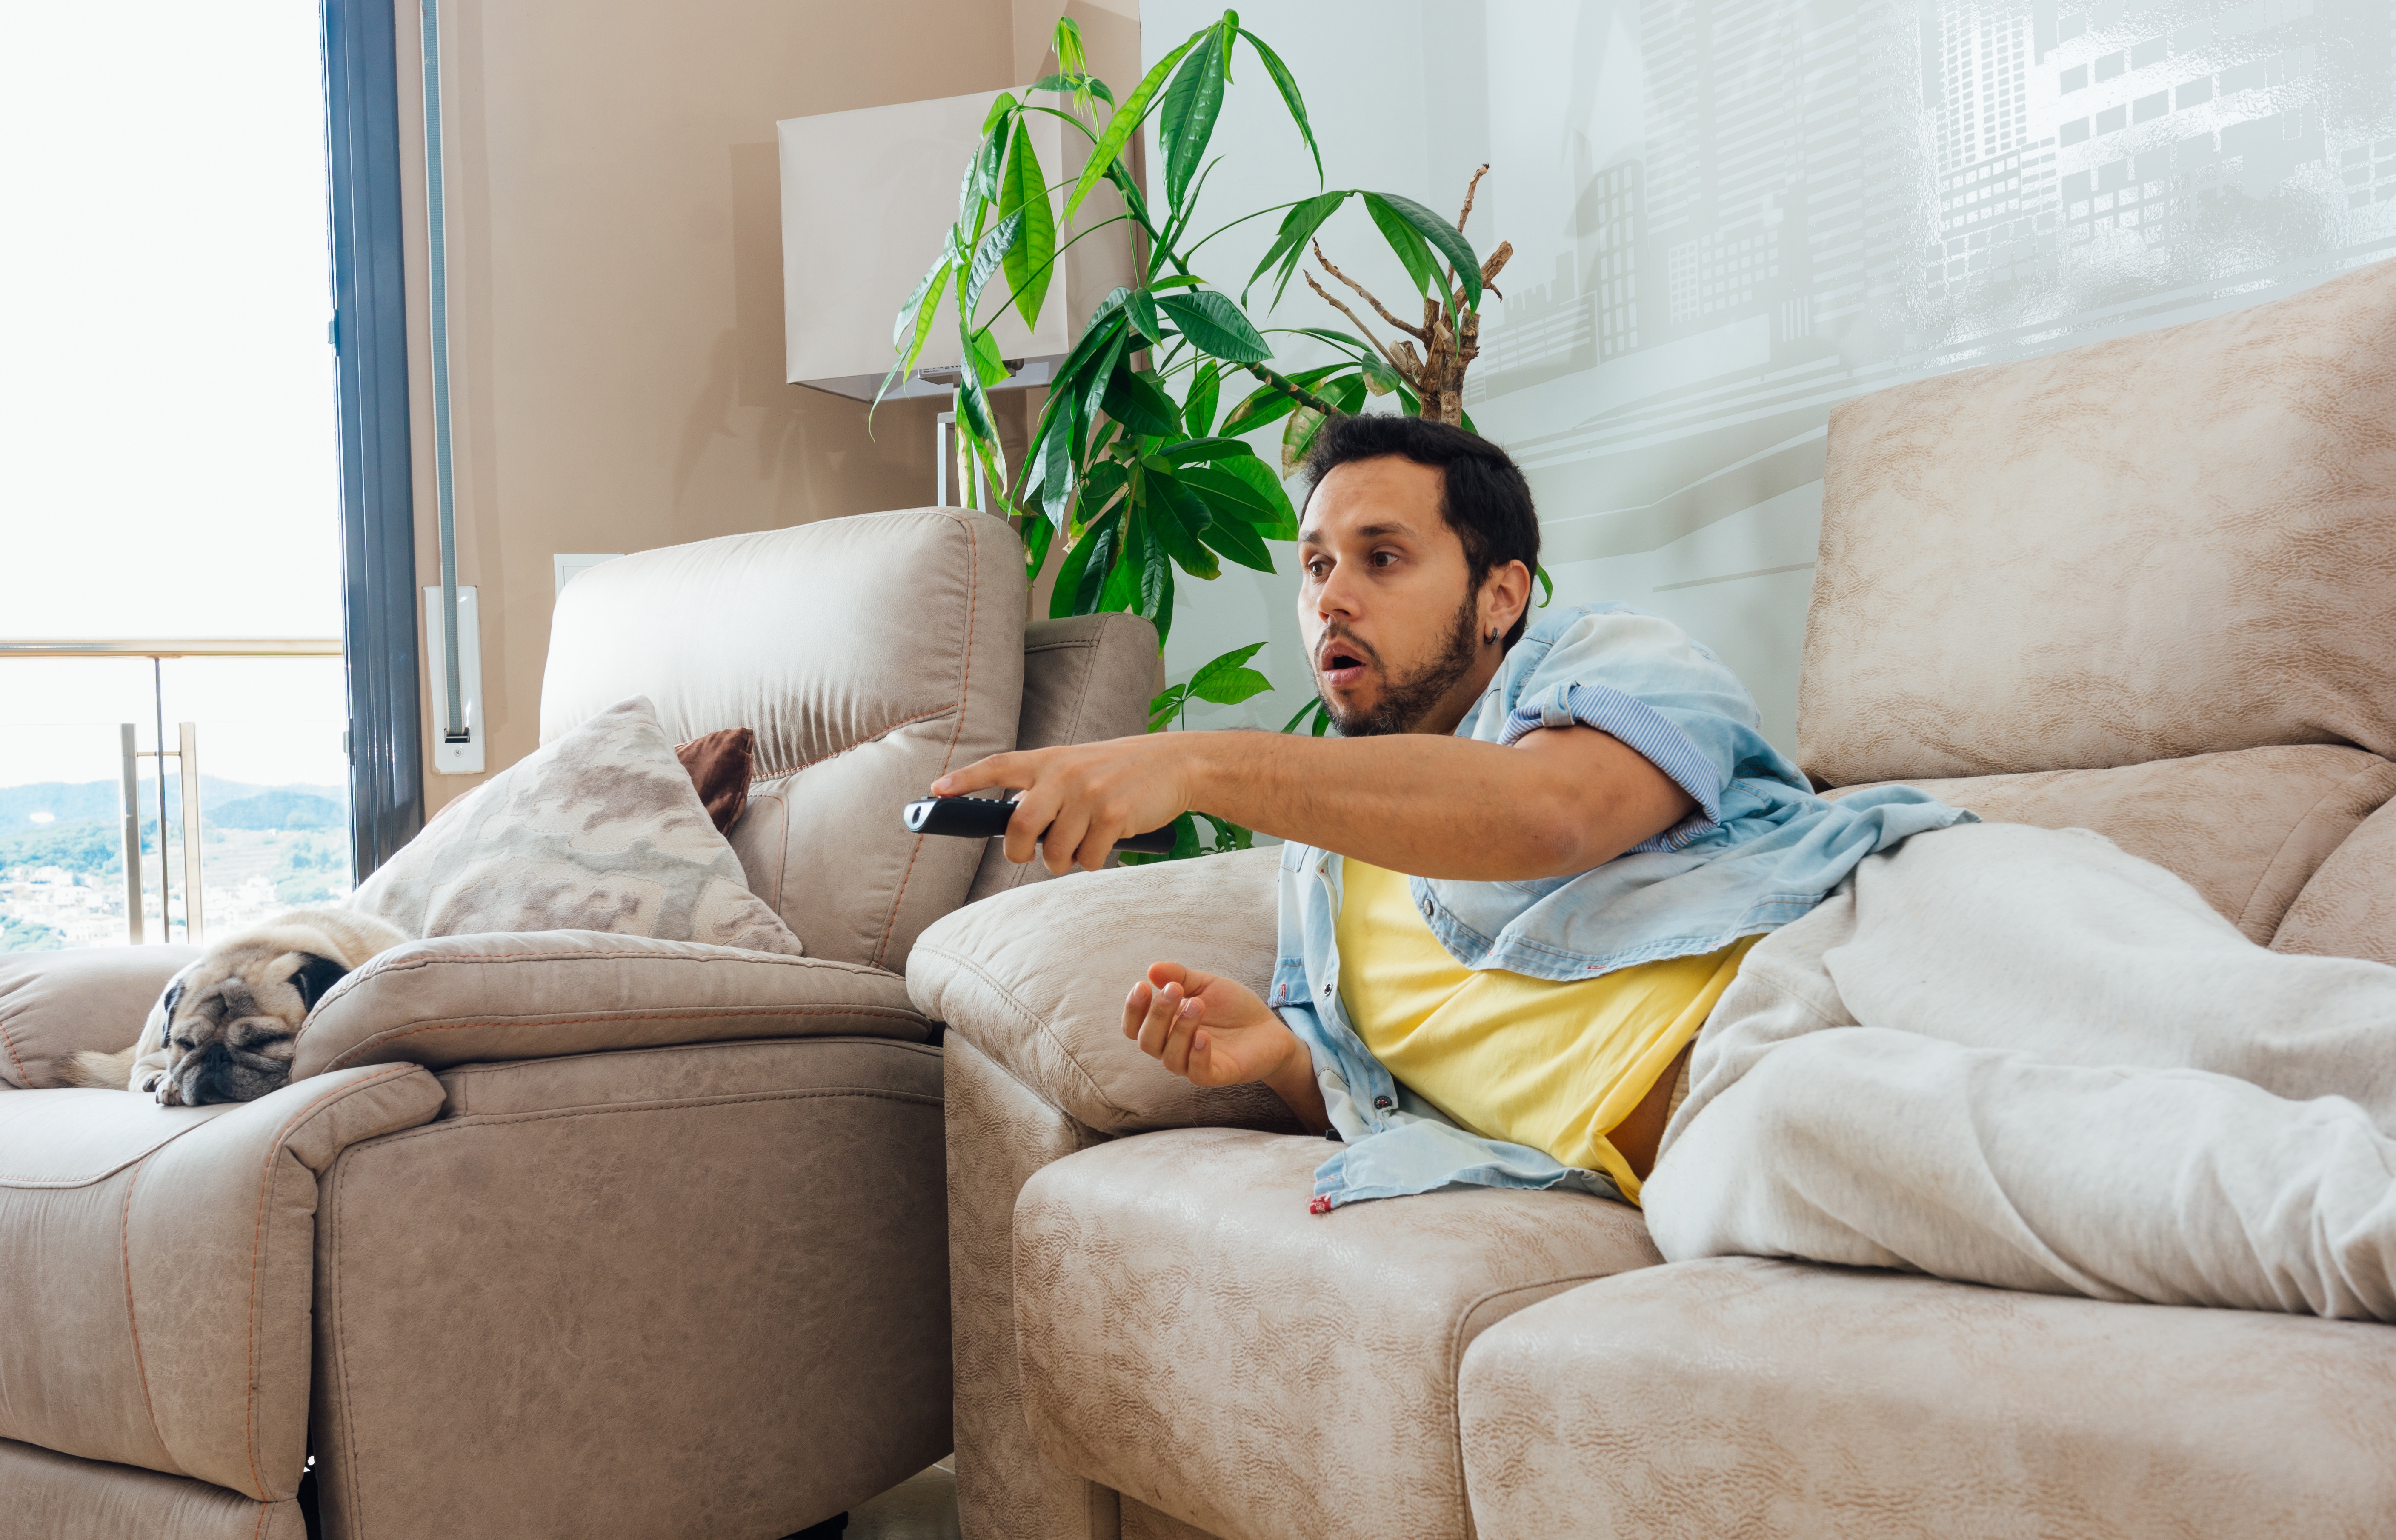 Man lounging on a couch with the TV remote | Source: wirestock on Freepik